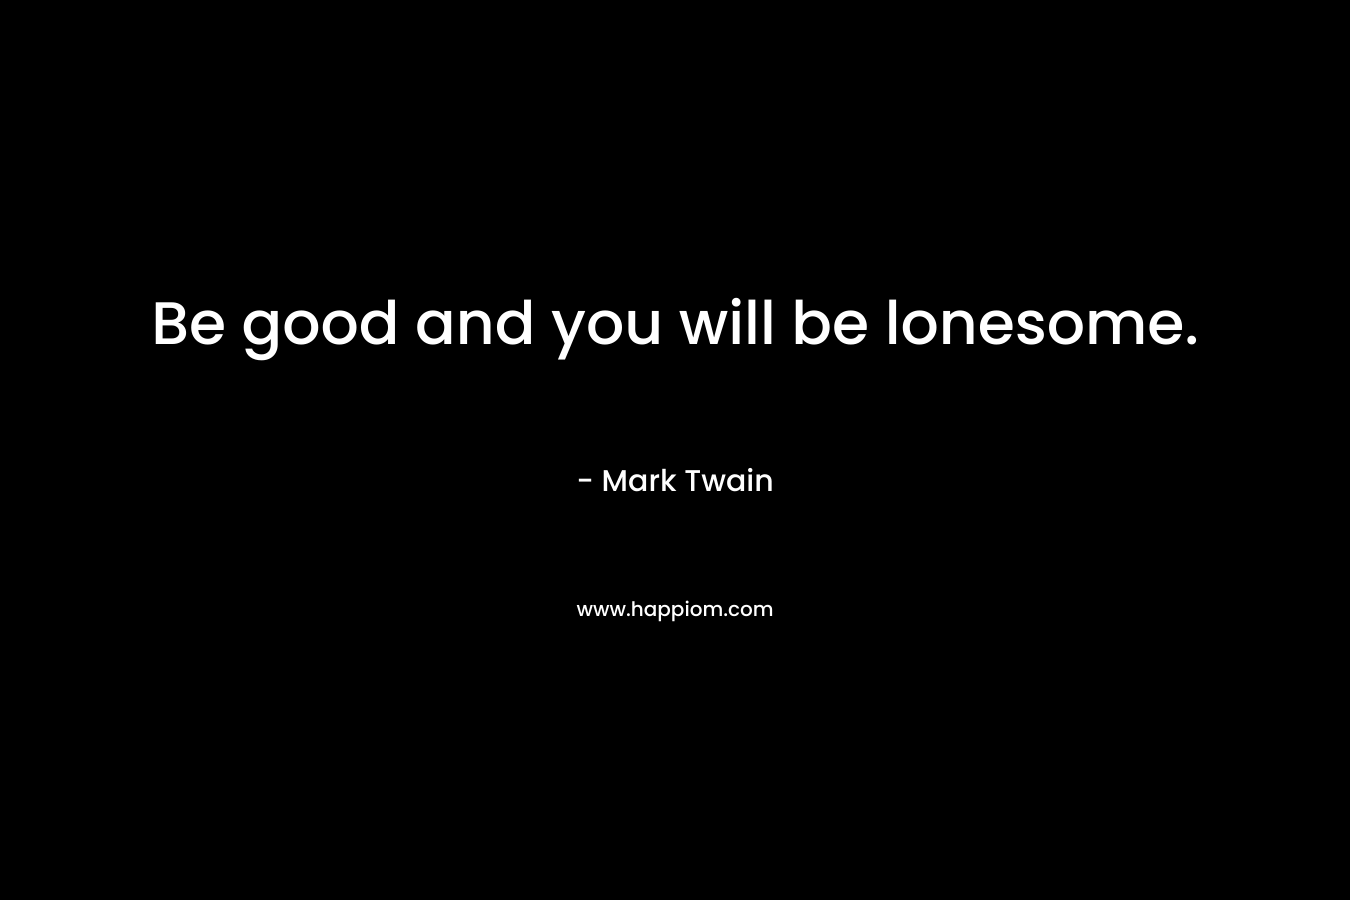 Be good and you will be lonesome.